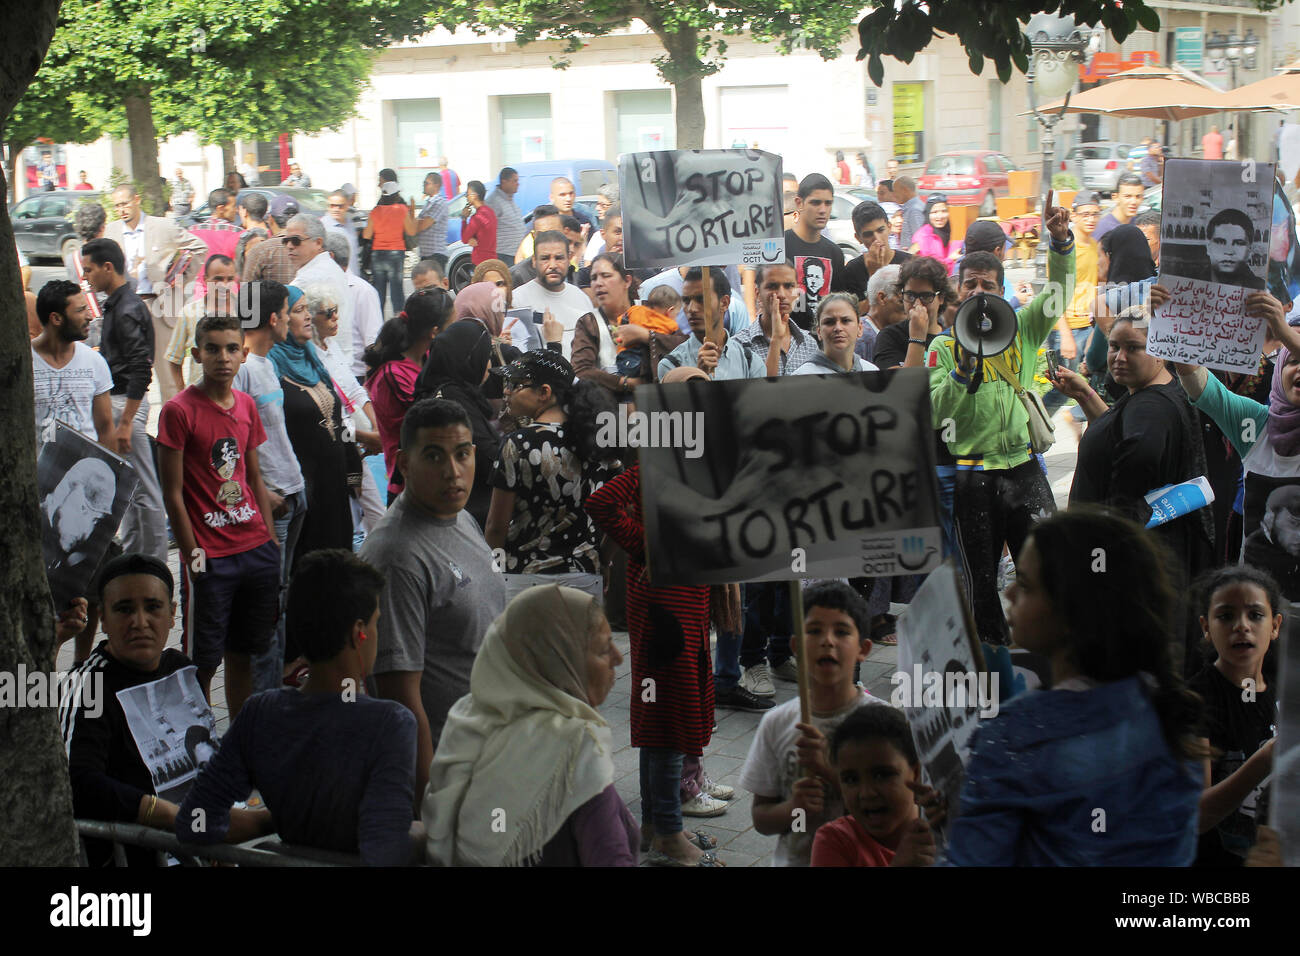 Tunis, Tunisia - 10.15.2014 - people protesting against violence Stock Photo